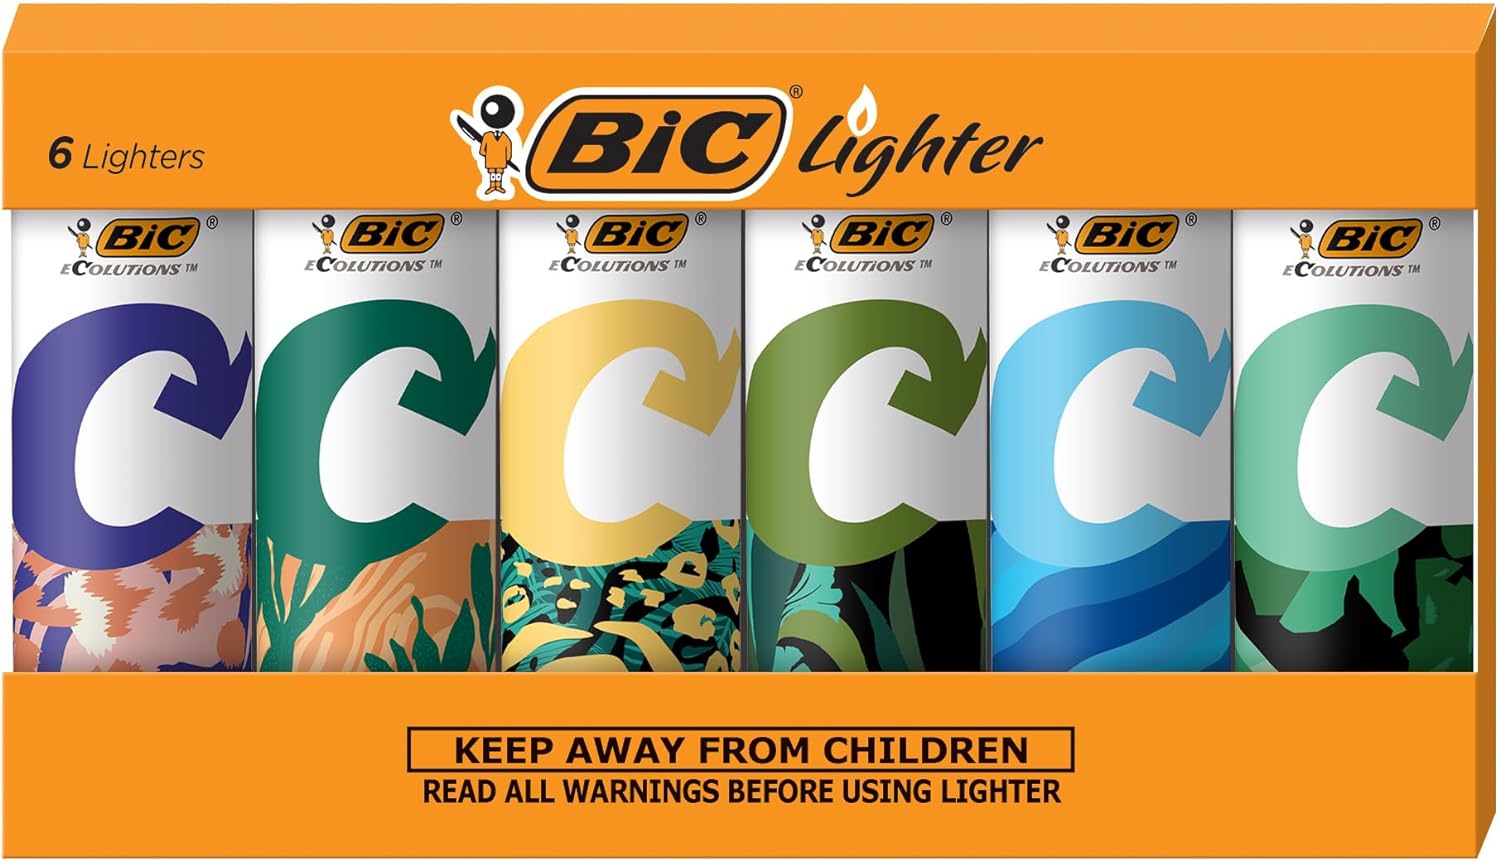 These are great lighters that are very long lasting. I picked these because I appreciated the design and eco-friendly element of them. BIC is always a solid go-to for lighters!